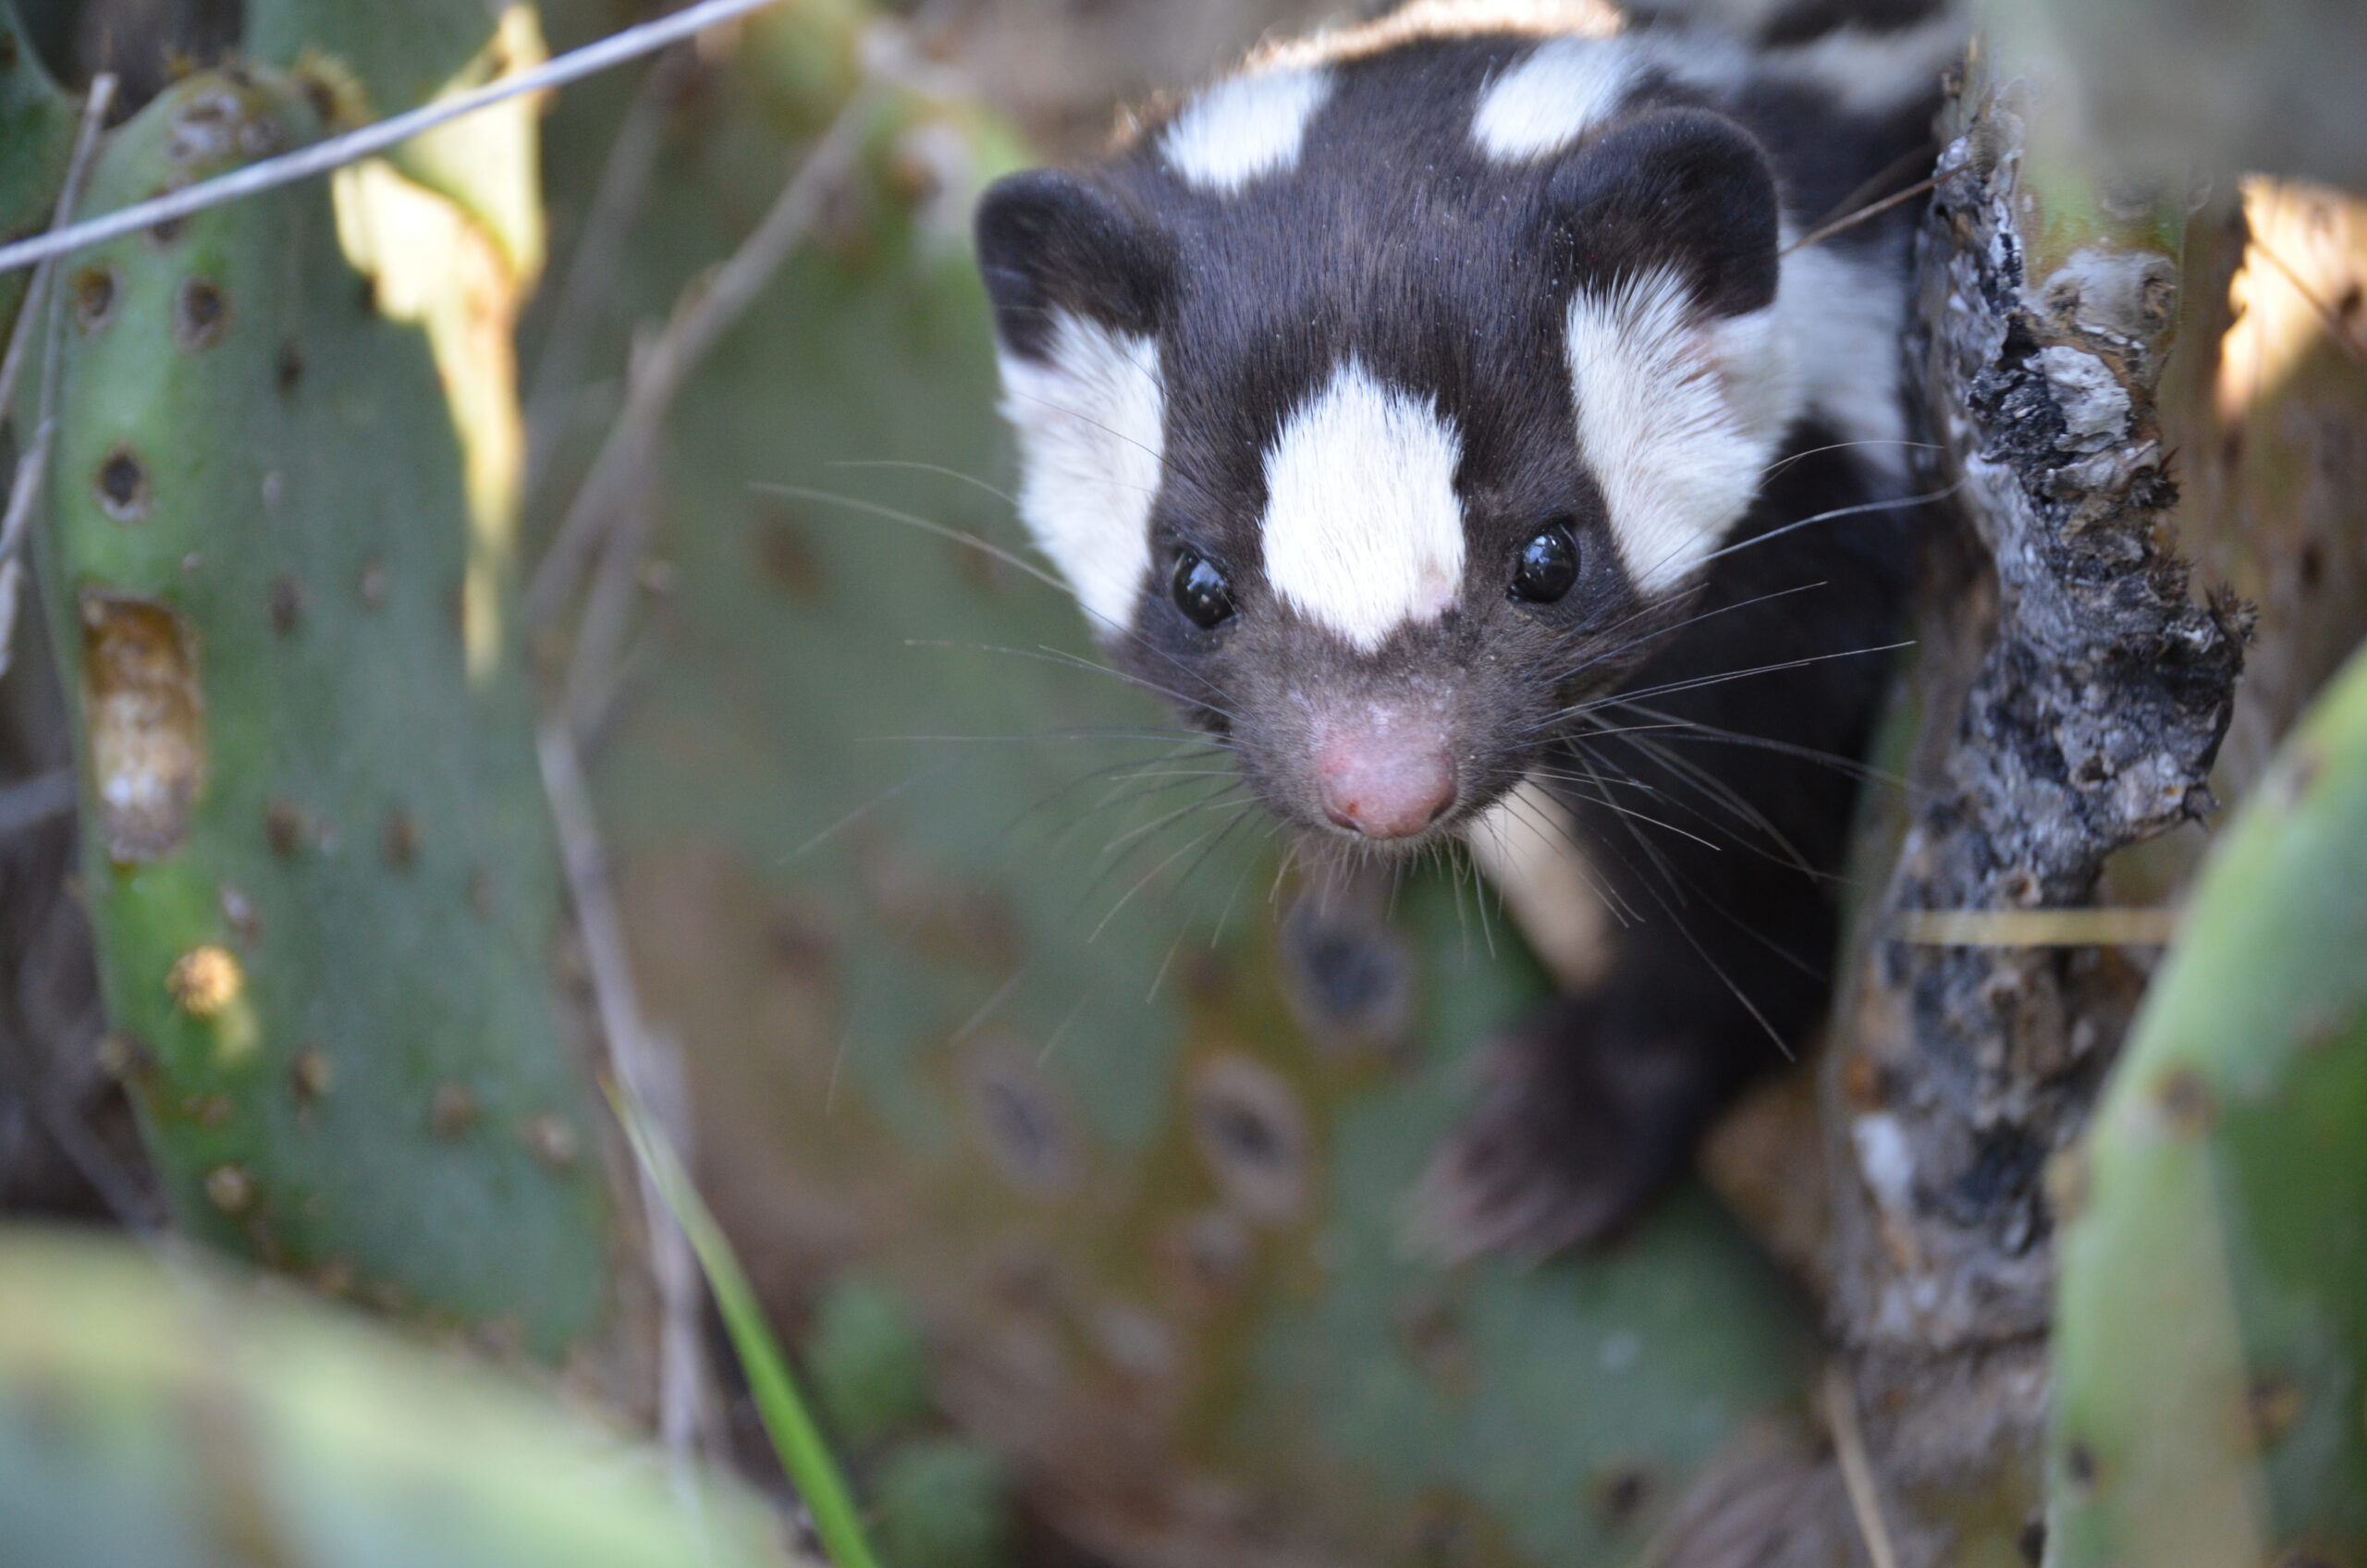 Ancient climate change drove the evolution of this adorable hand-standing skunk